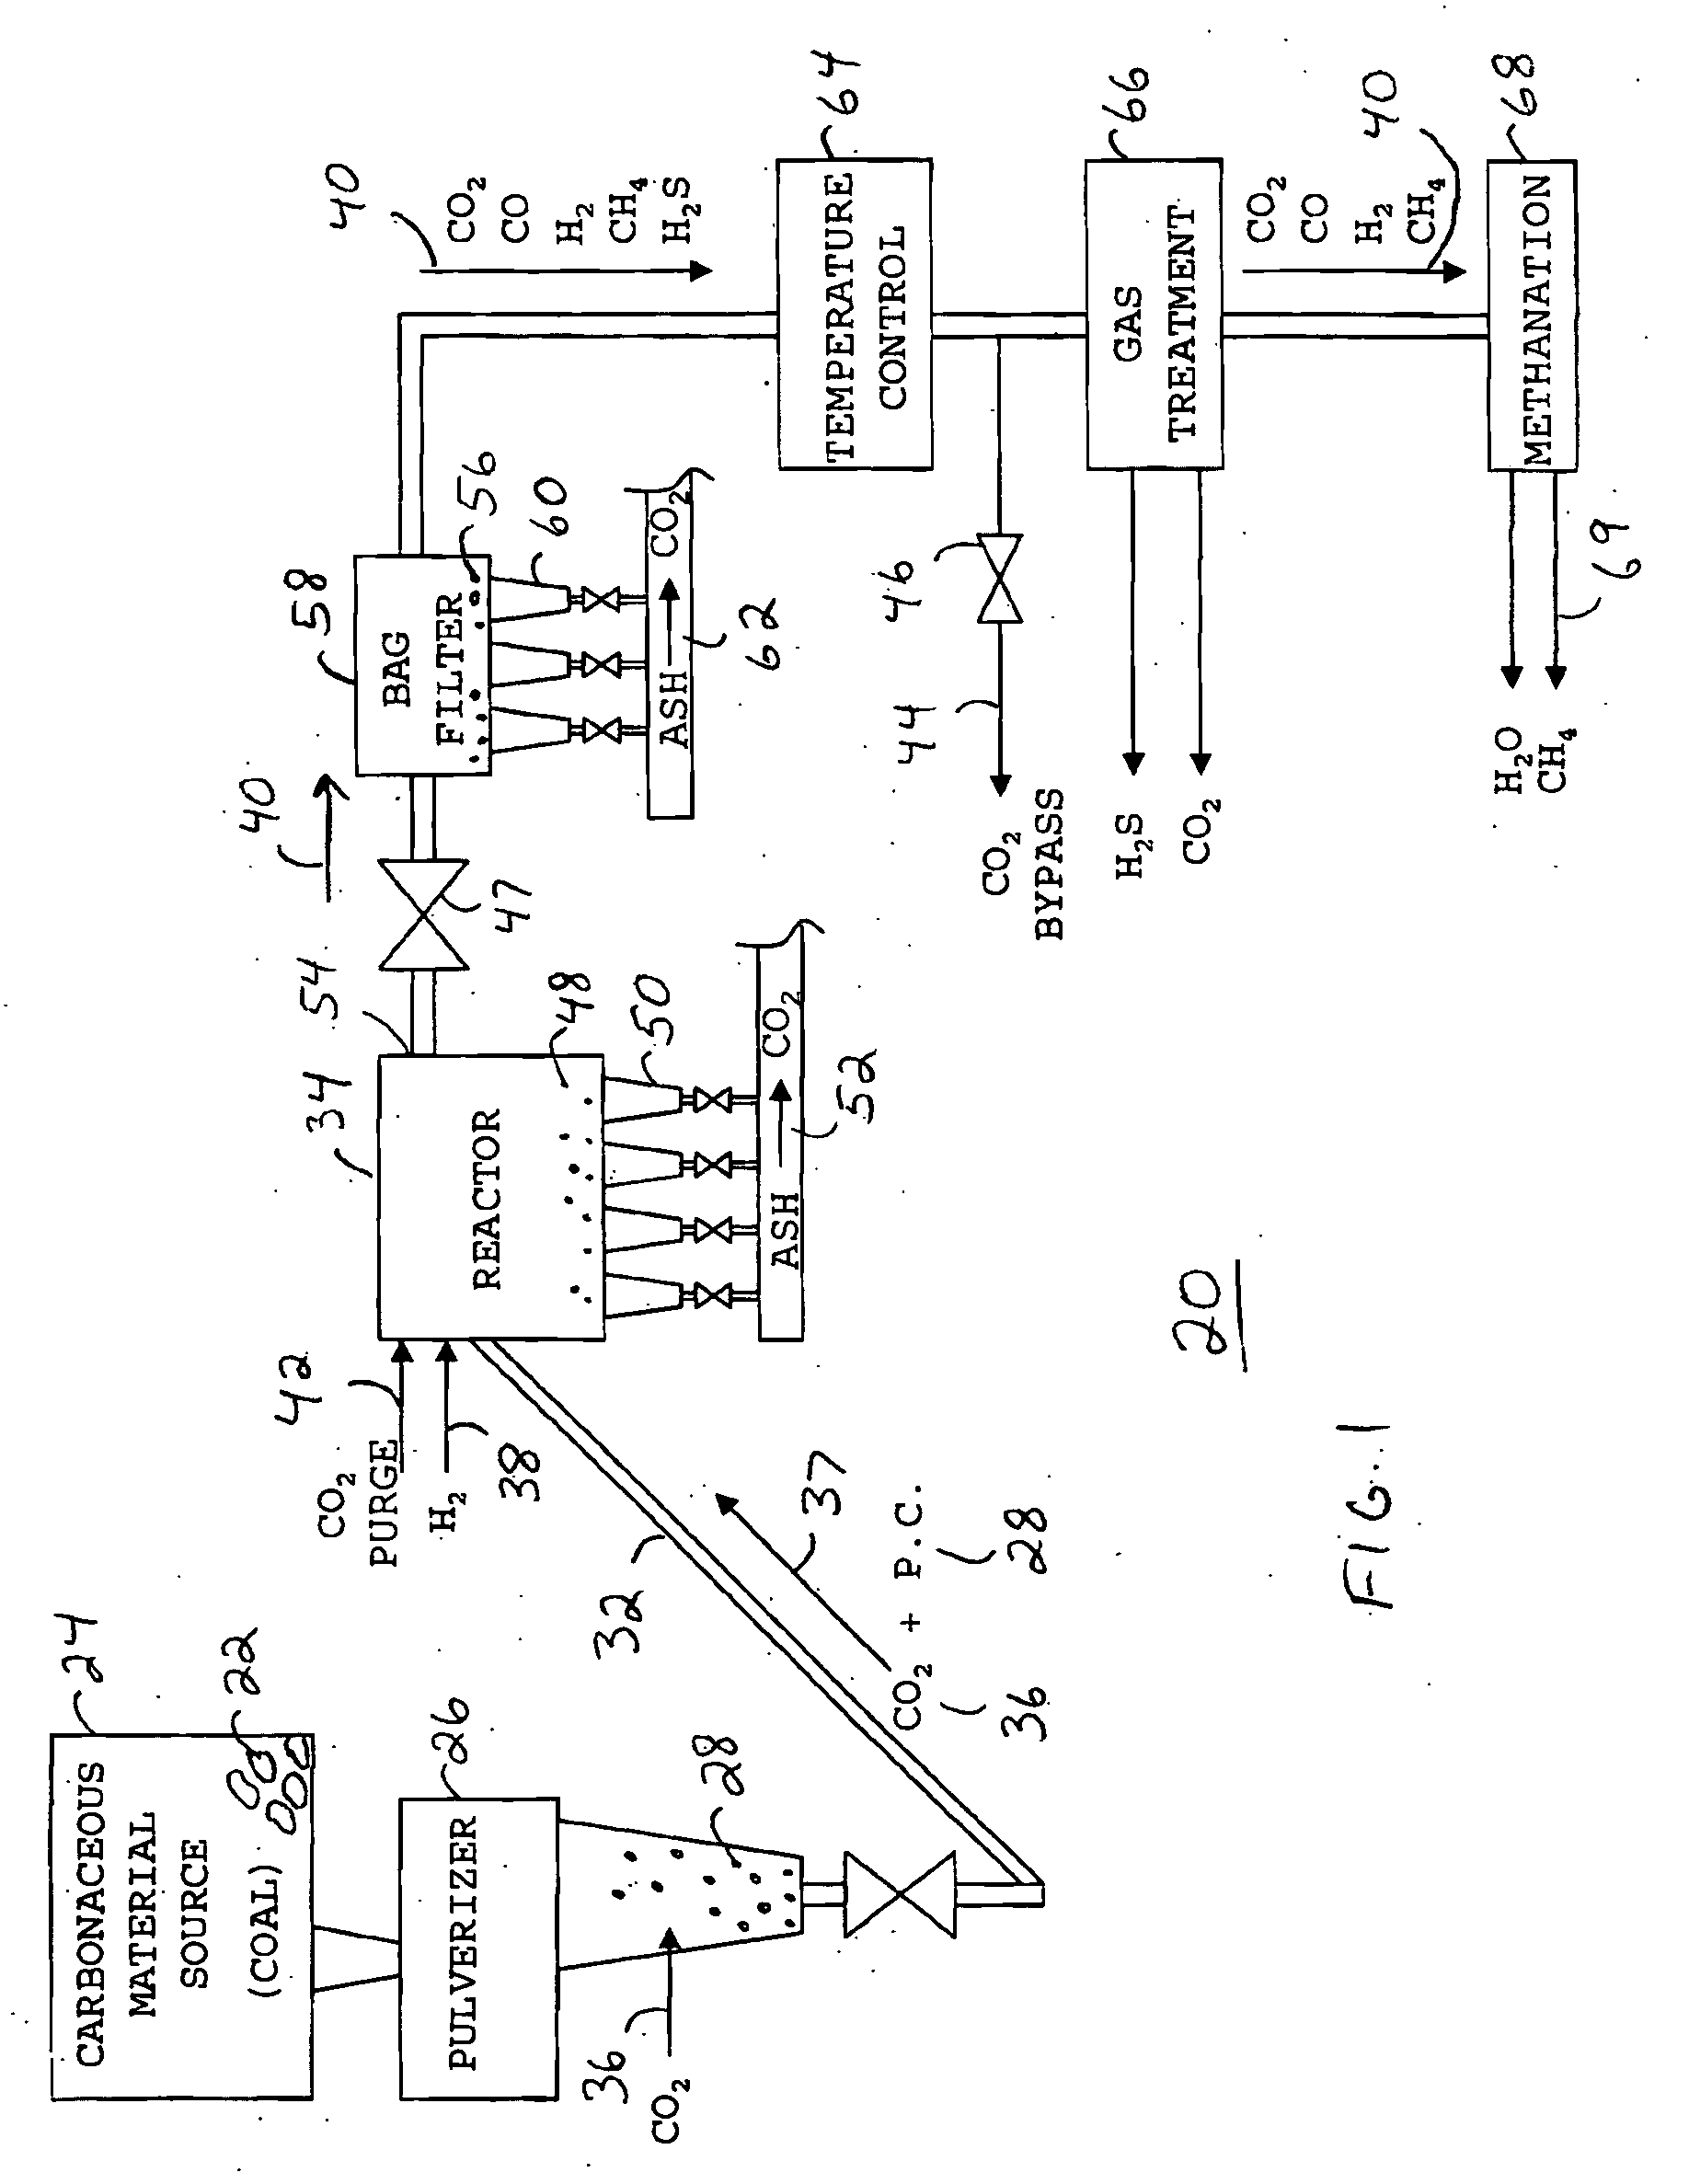 Method and apparatus for producing methane from carbonaceous material